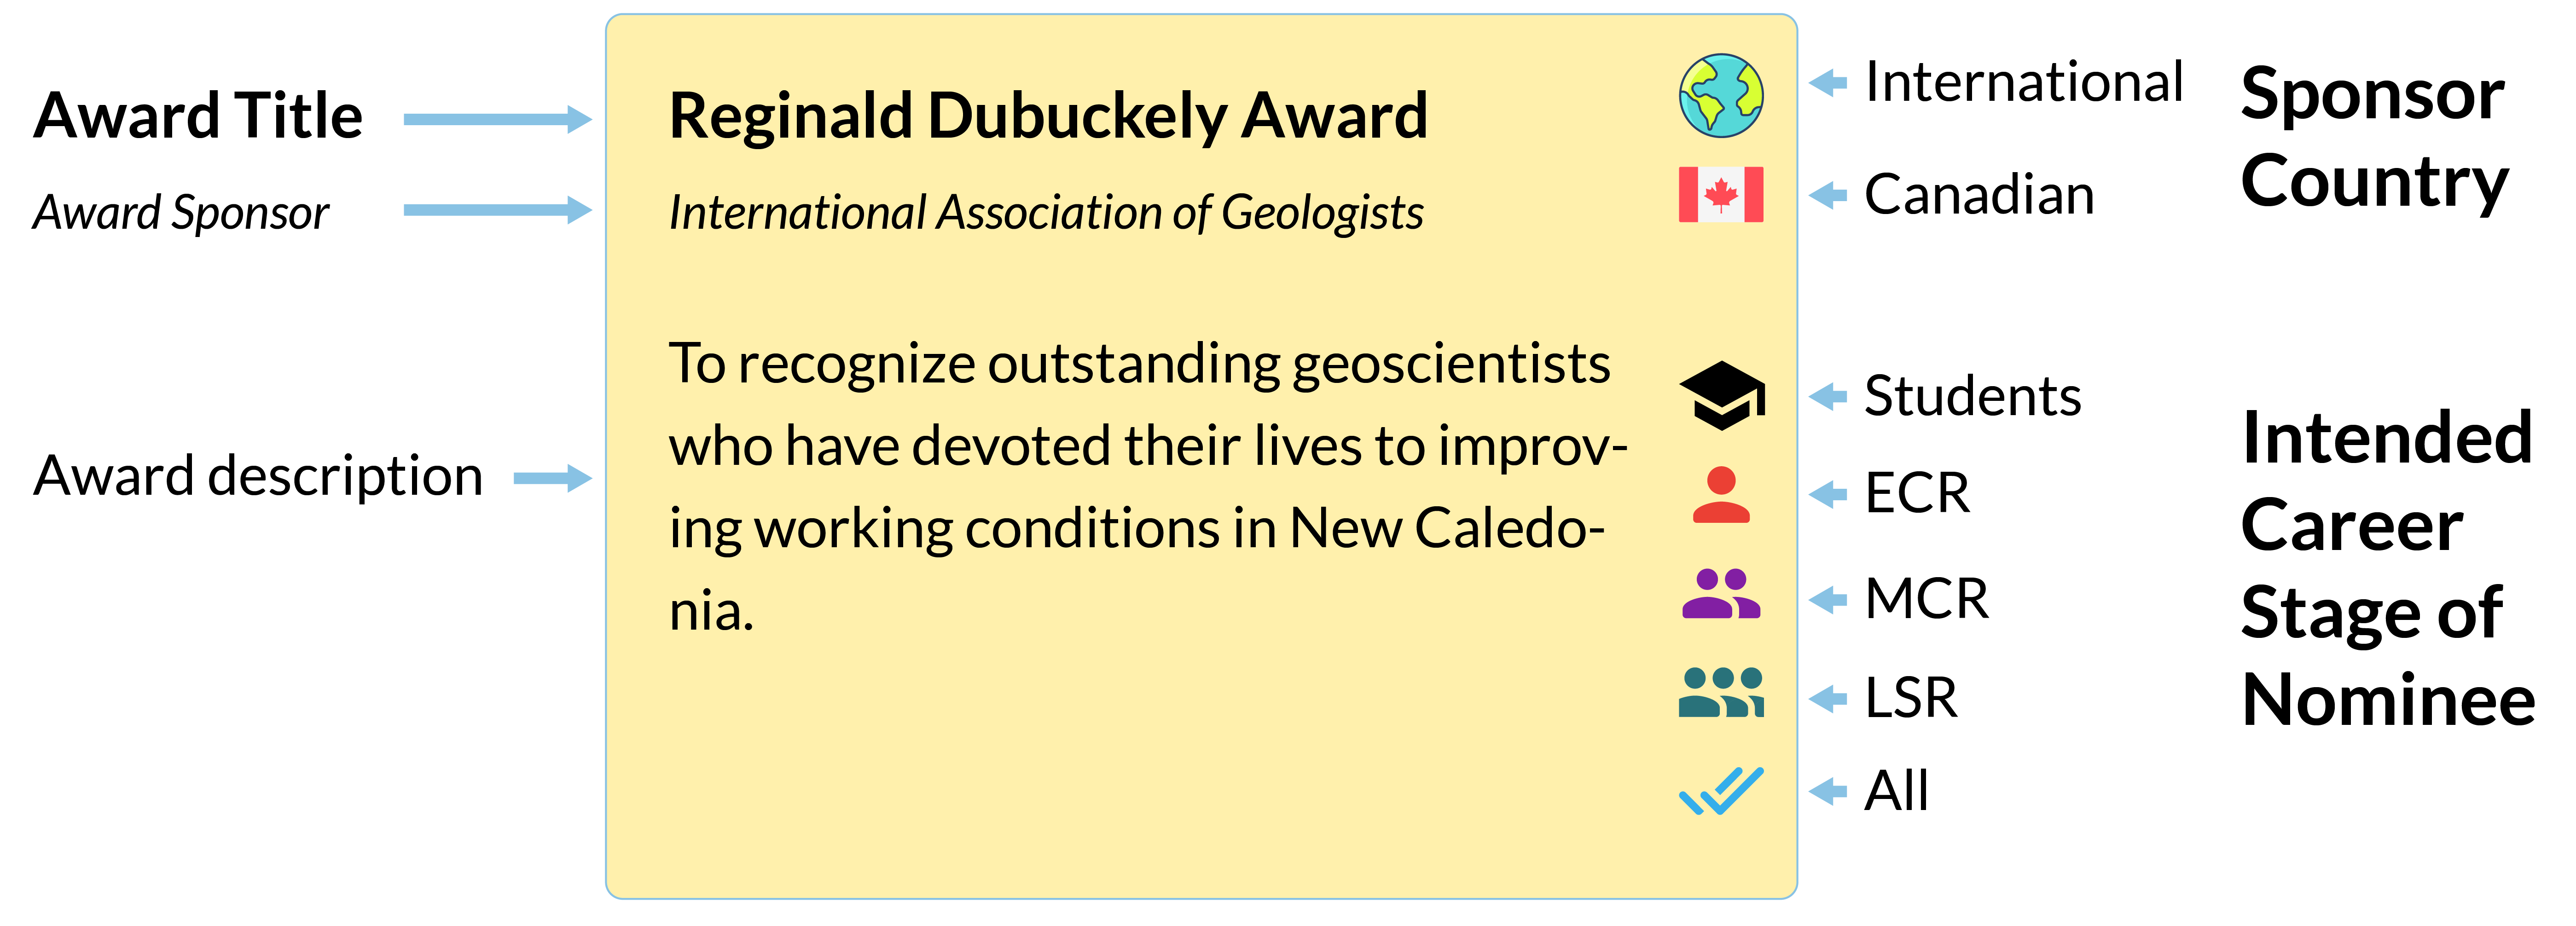 An image describing the components of an Earth Science Award